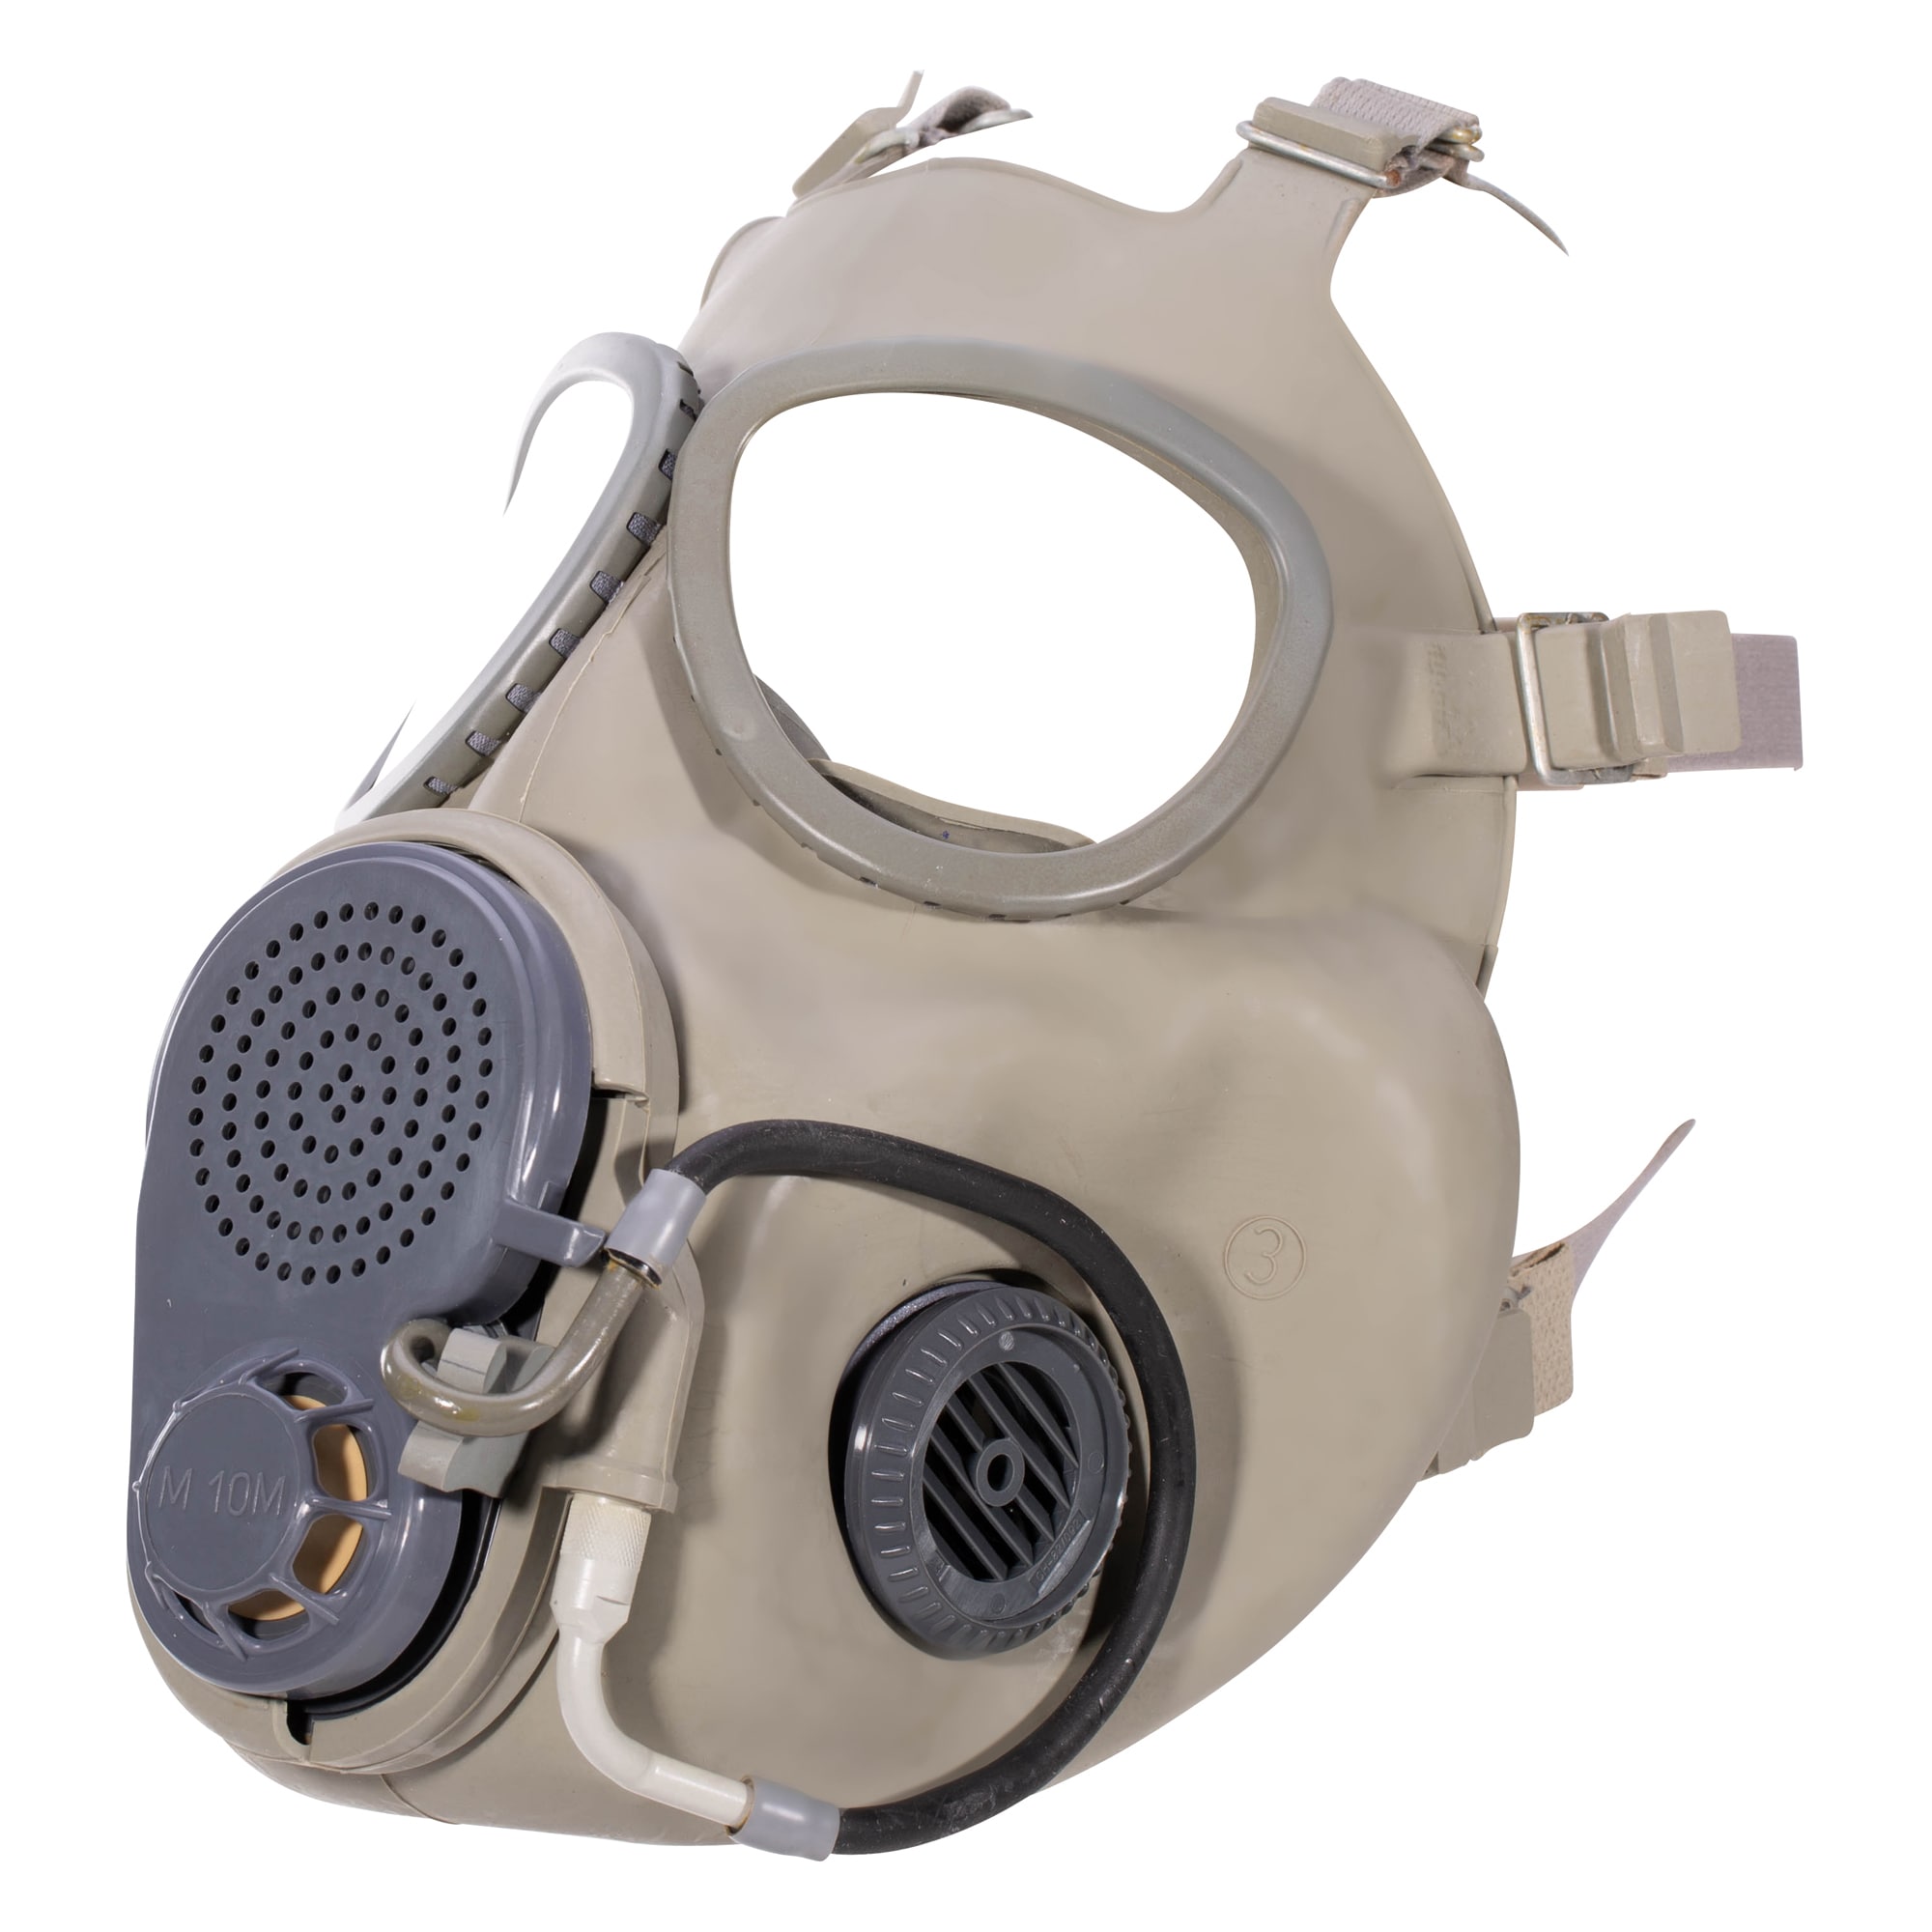 the Gas Mask M10M by ASMC